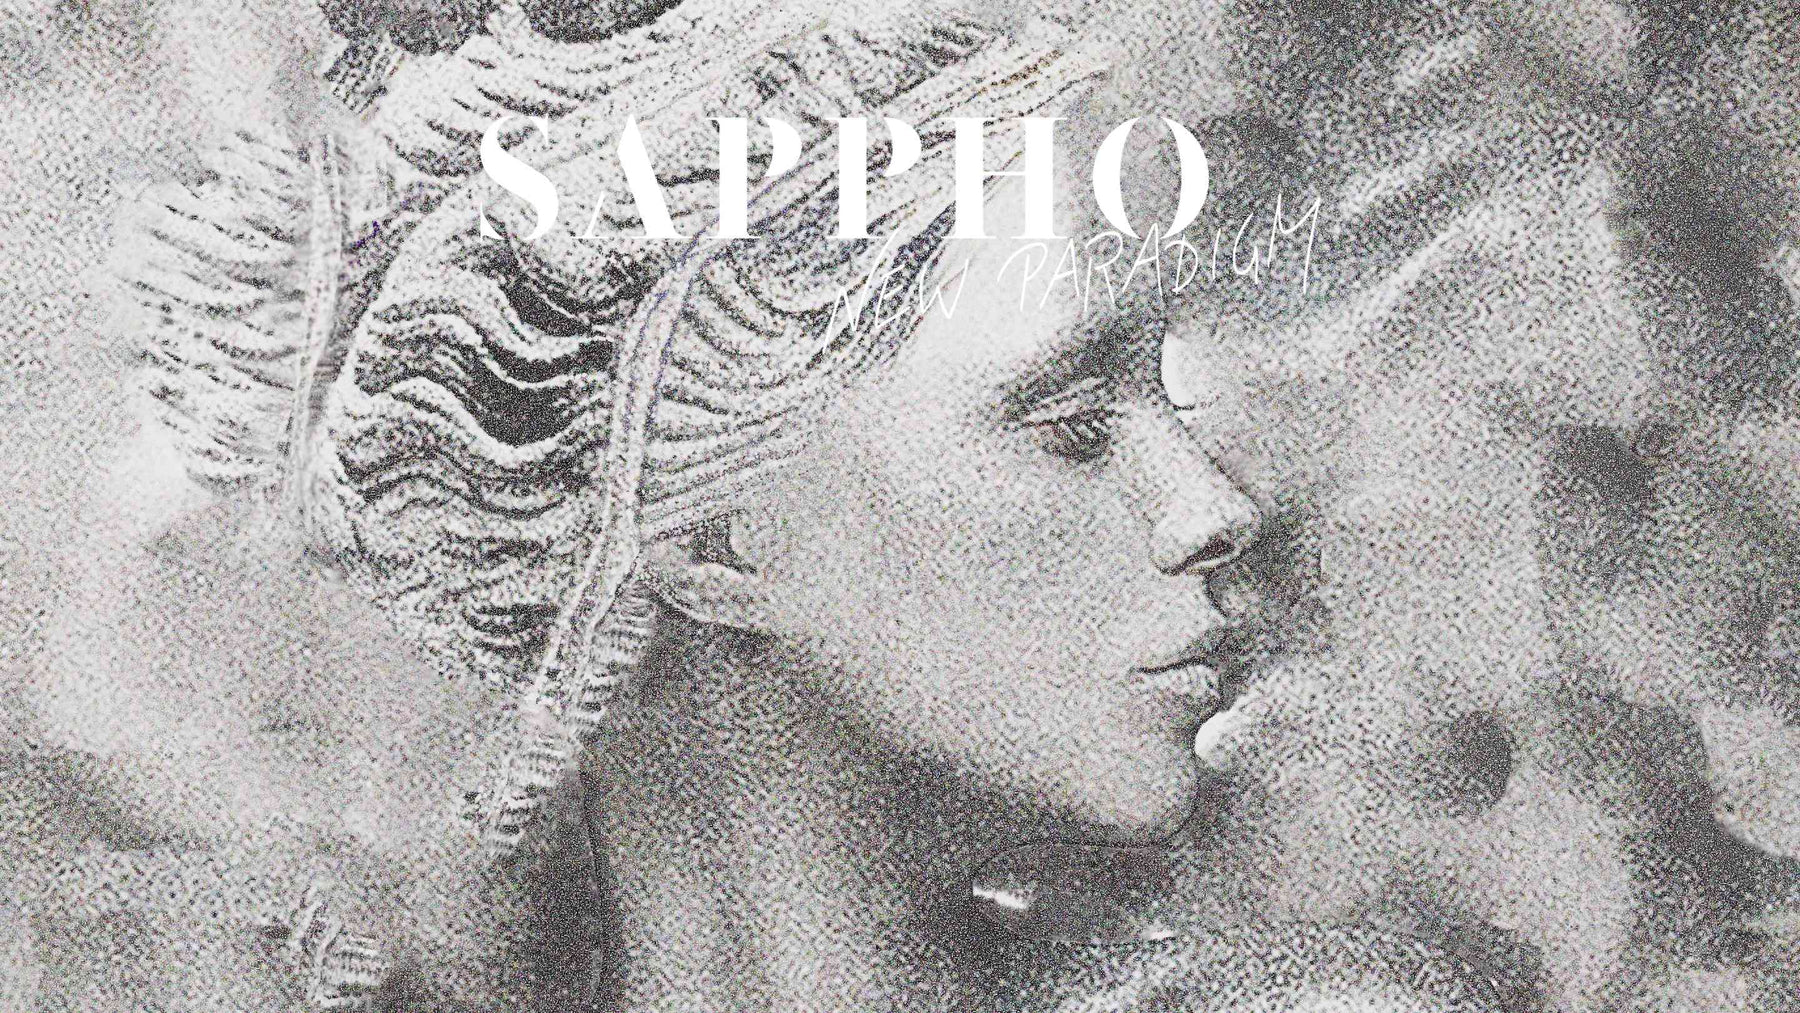 Original rendition of a model covered in silver bioglitter reminiscent of a bust of poet Sappho, on a similarly textured background with a big SAPPHO New Paradigm logo in white 